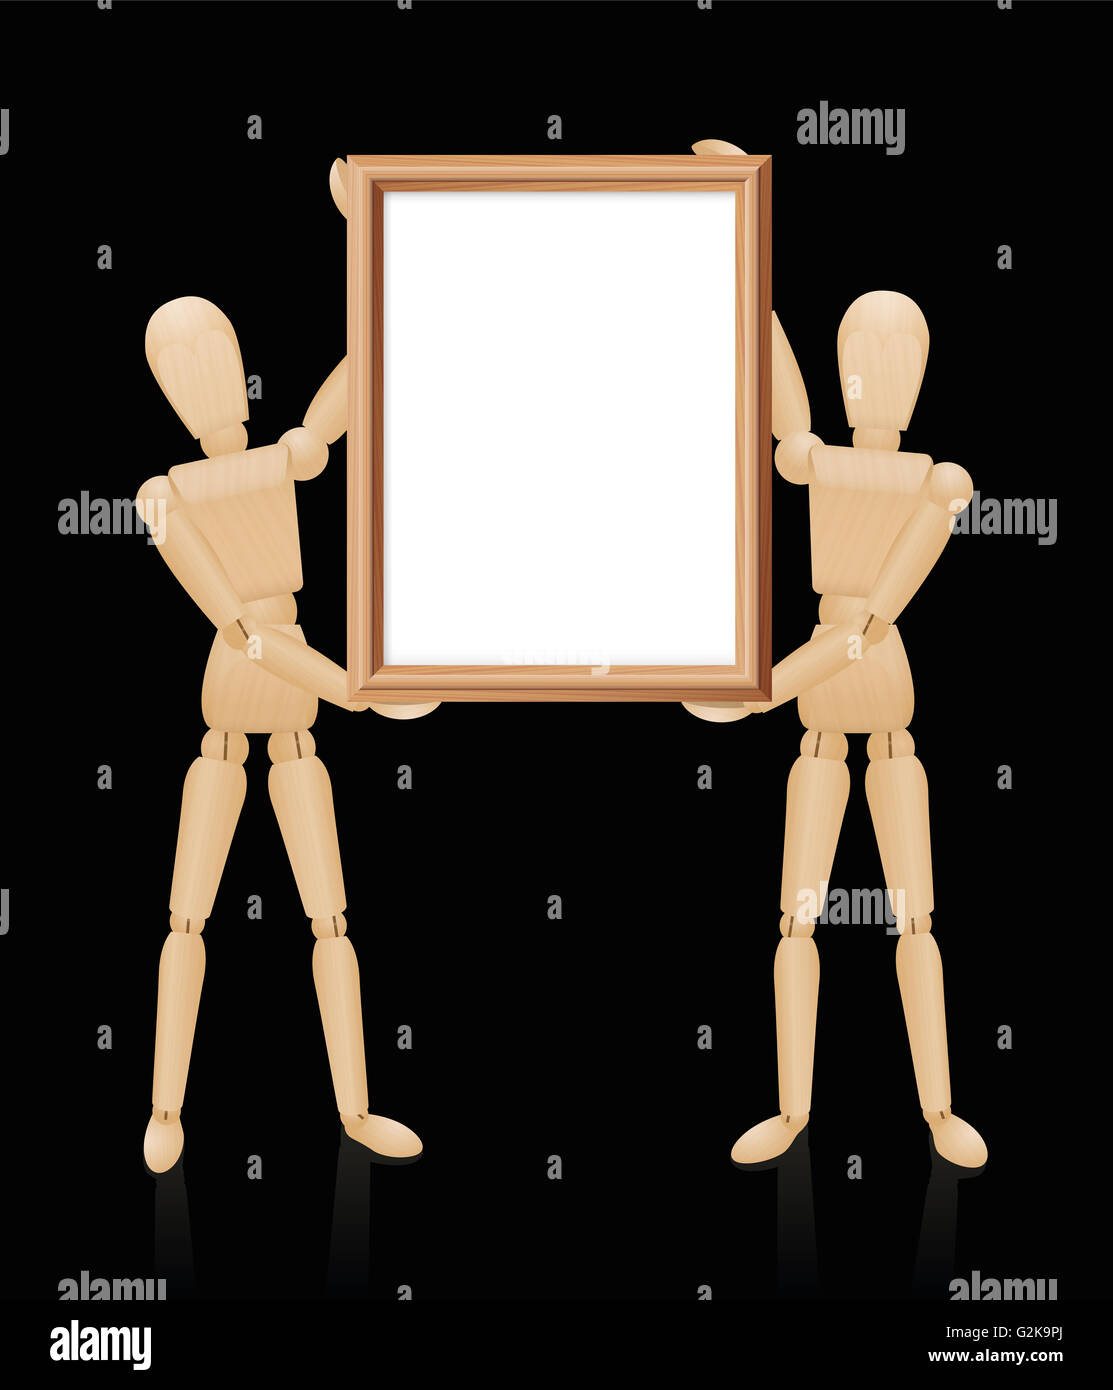 Wooden mannequins holding blank wooden picture frame, high size format. Illustration on black background. Stock Photo